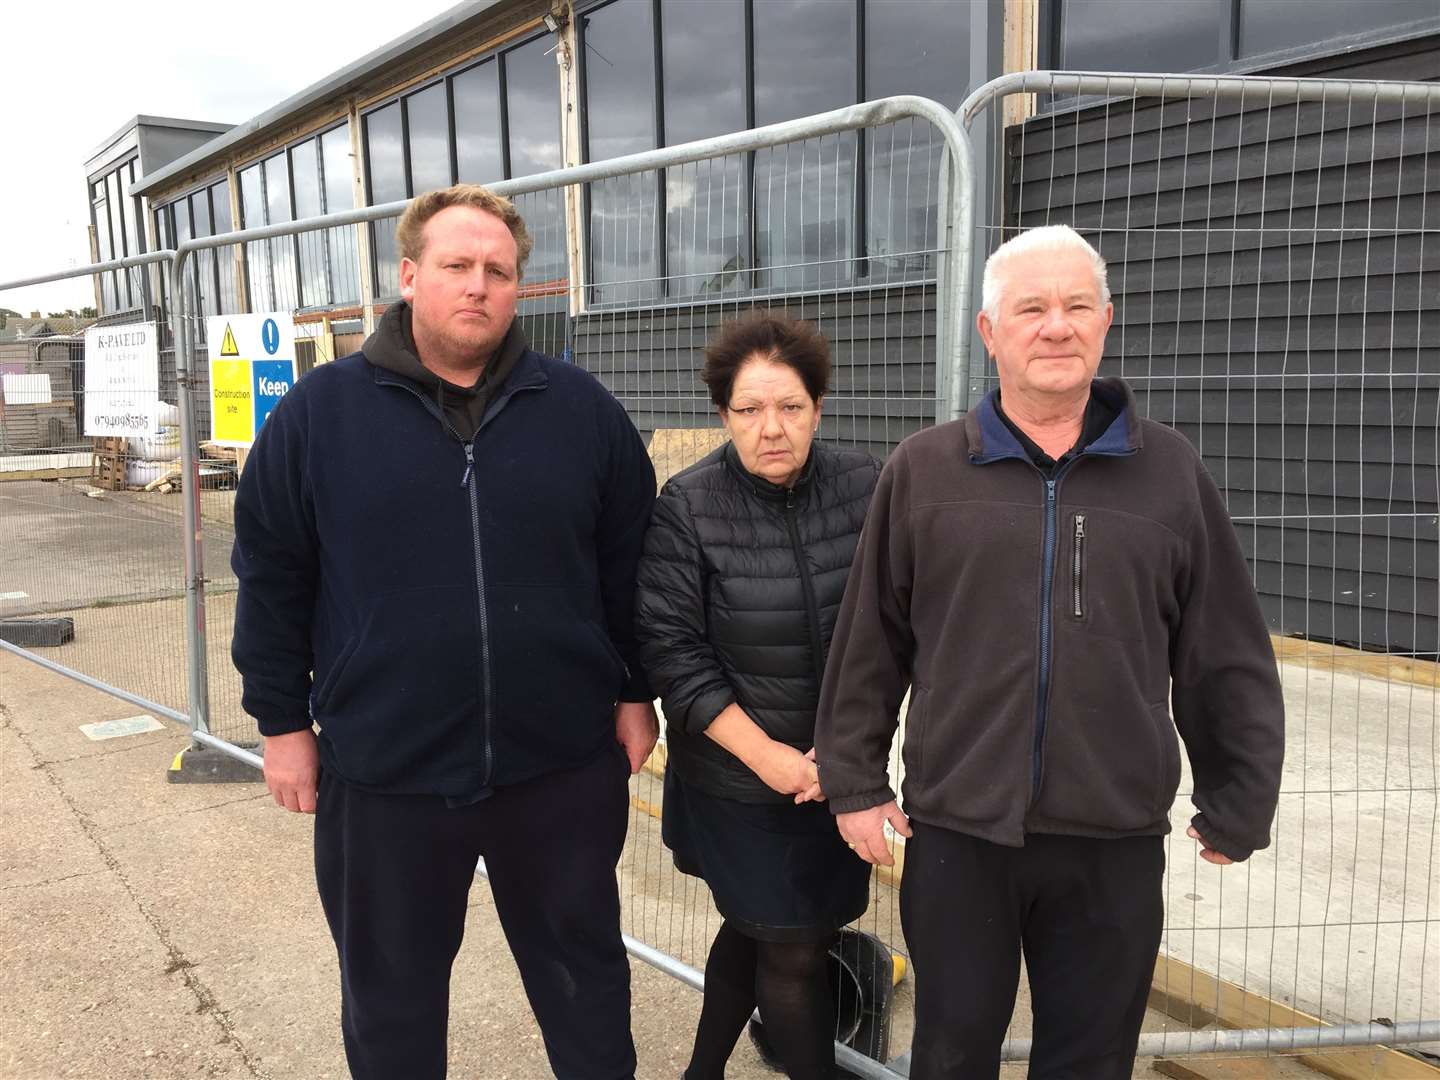 Chris Attenborough from Whitstable Fishermen's Association, Whitstable Fish Market owners Peter and Elizabeth Bennett have said the South Quay Shed development will create a bottleneck in the town's harbour